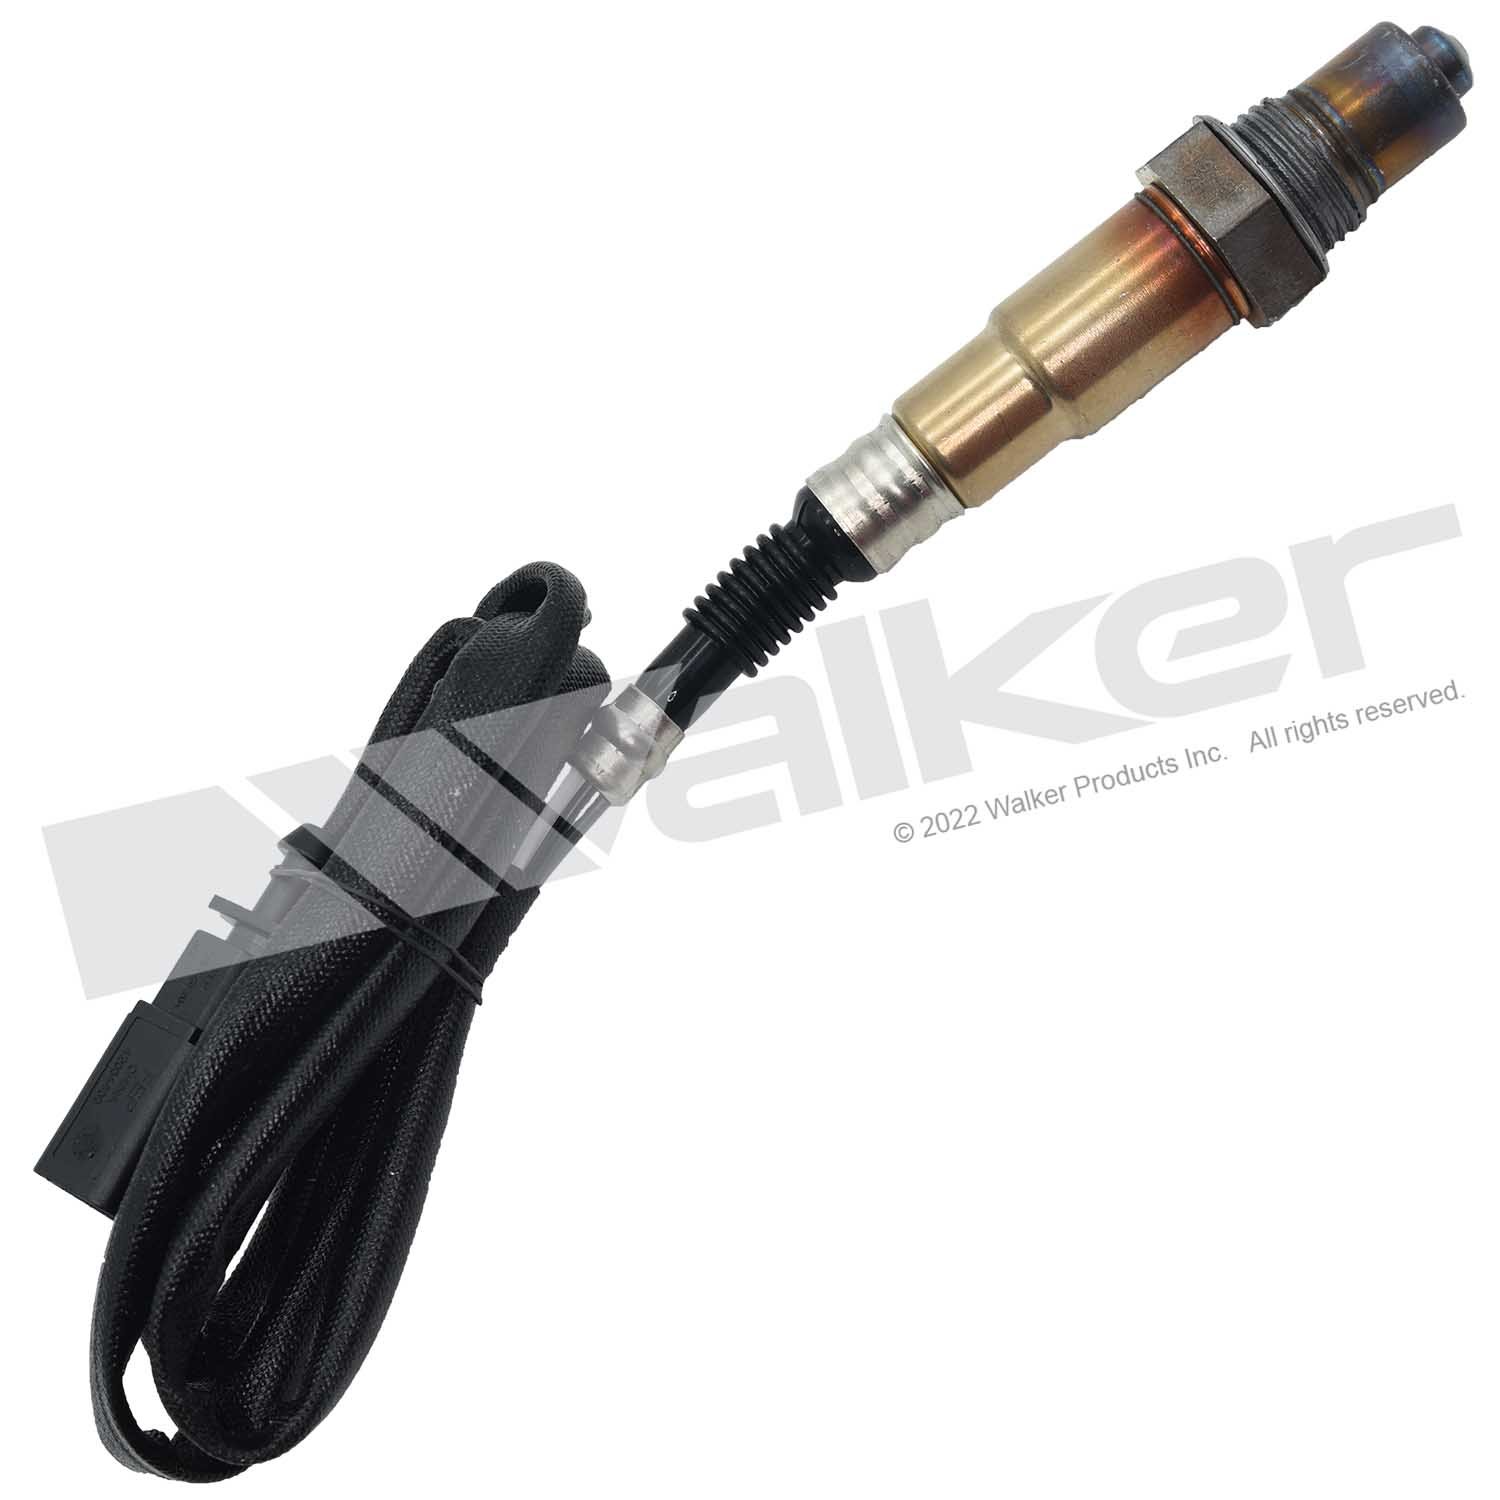 WALKER PRODUCTS 350-341046